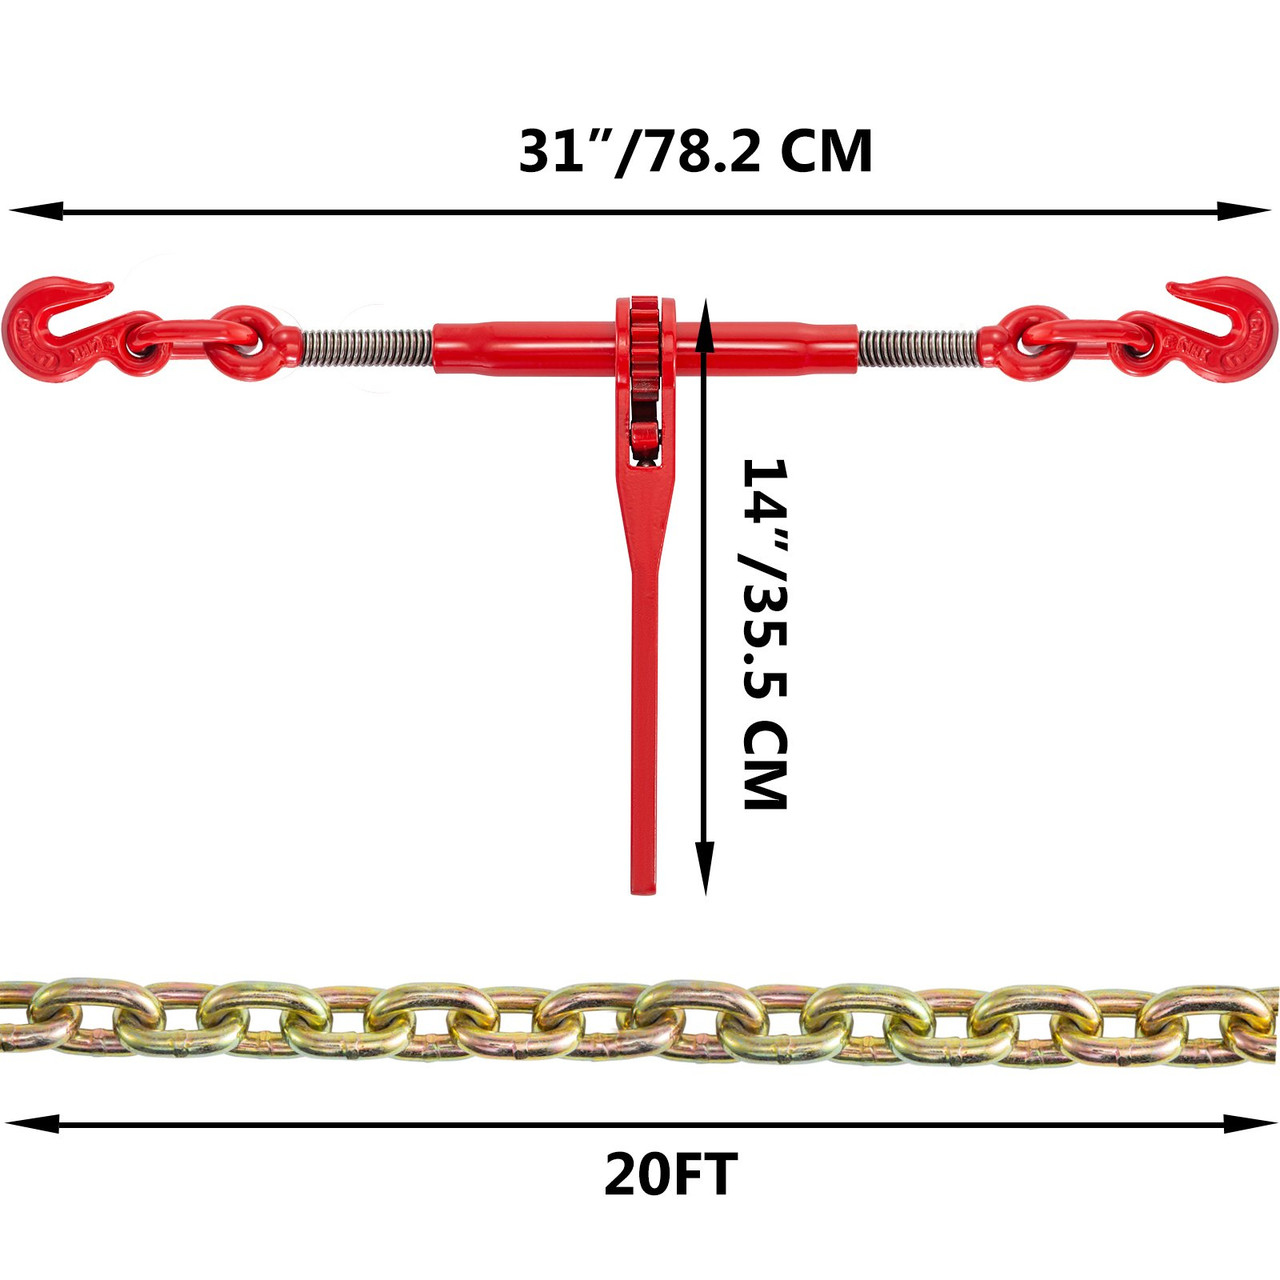 Chain and Binder Kit 5/16in-3/8in, Ratchet Load Binders 6600lbs Working Strength, Ratchet Binders and Chains, 5/16in x 20ft Chains w/ G70 Hooks, for Truck, Tie Down, Hauling, Towing